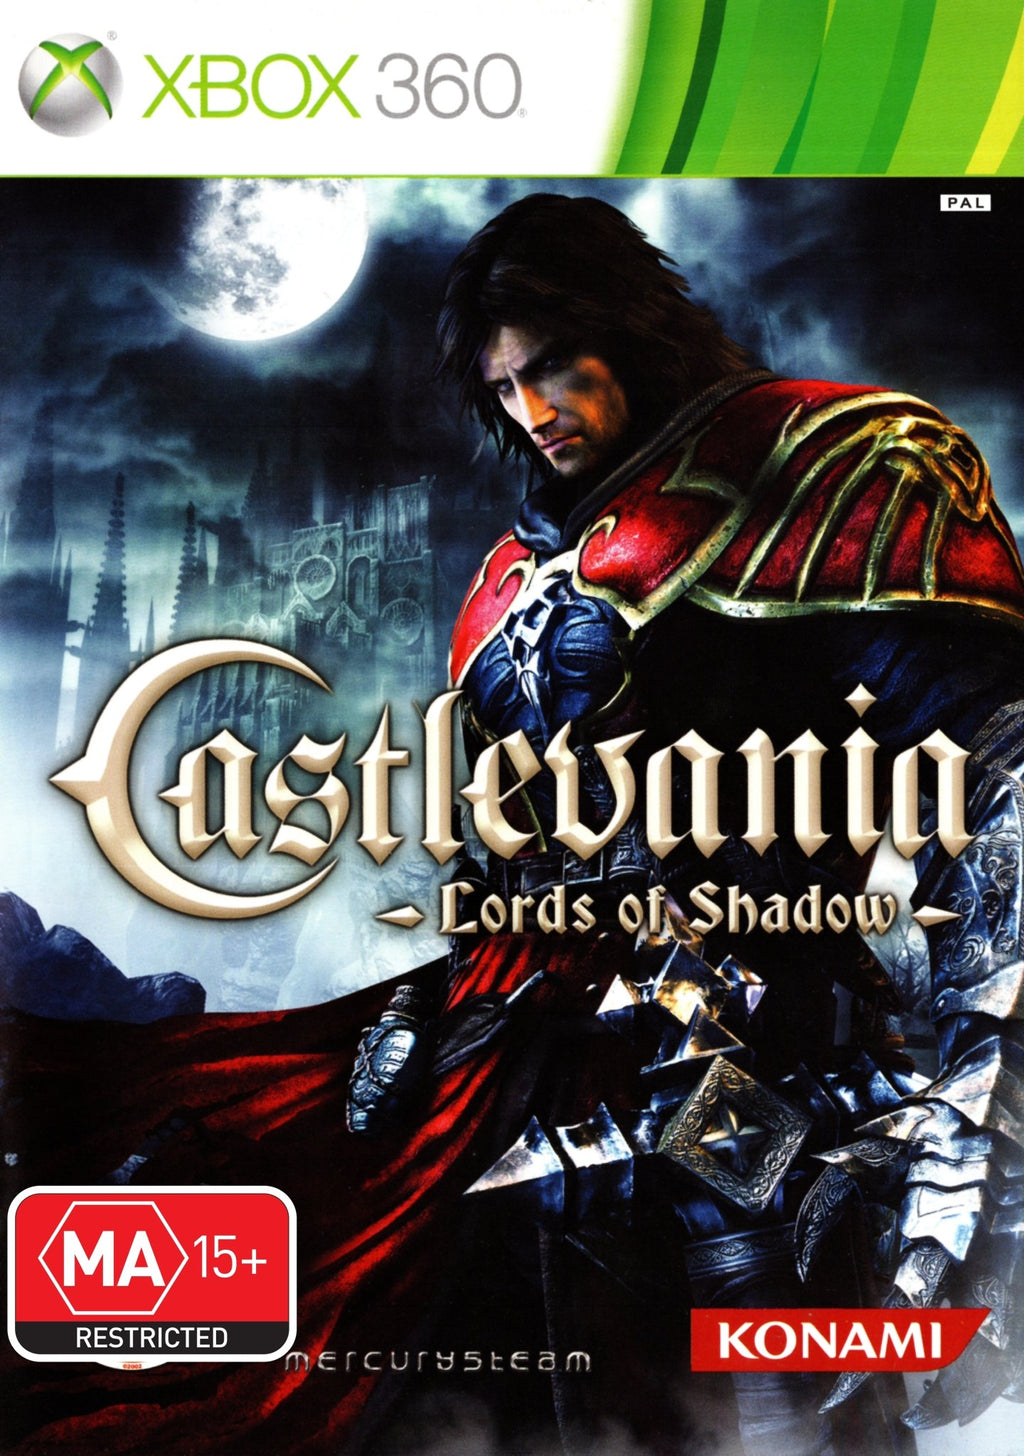 Game | Microsoft Xbox 360 | Castlevania: Lords Of Shadow